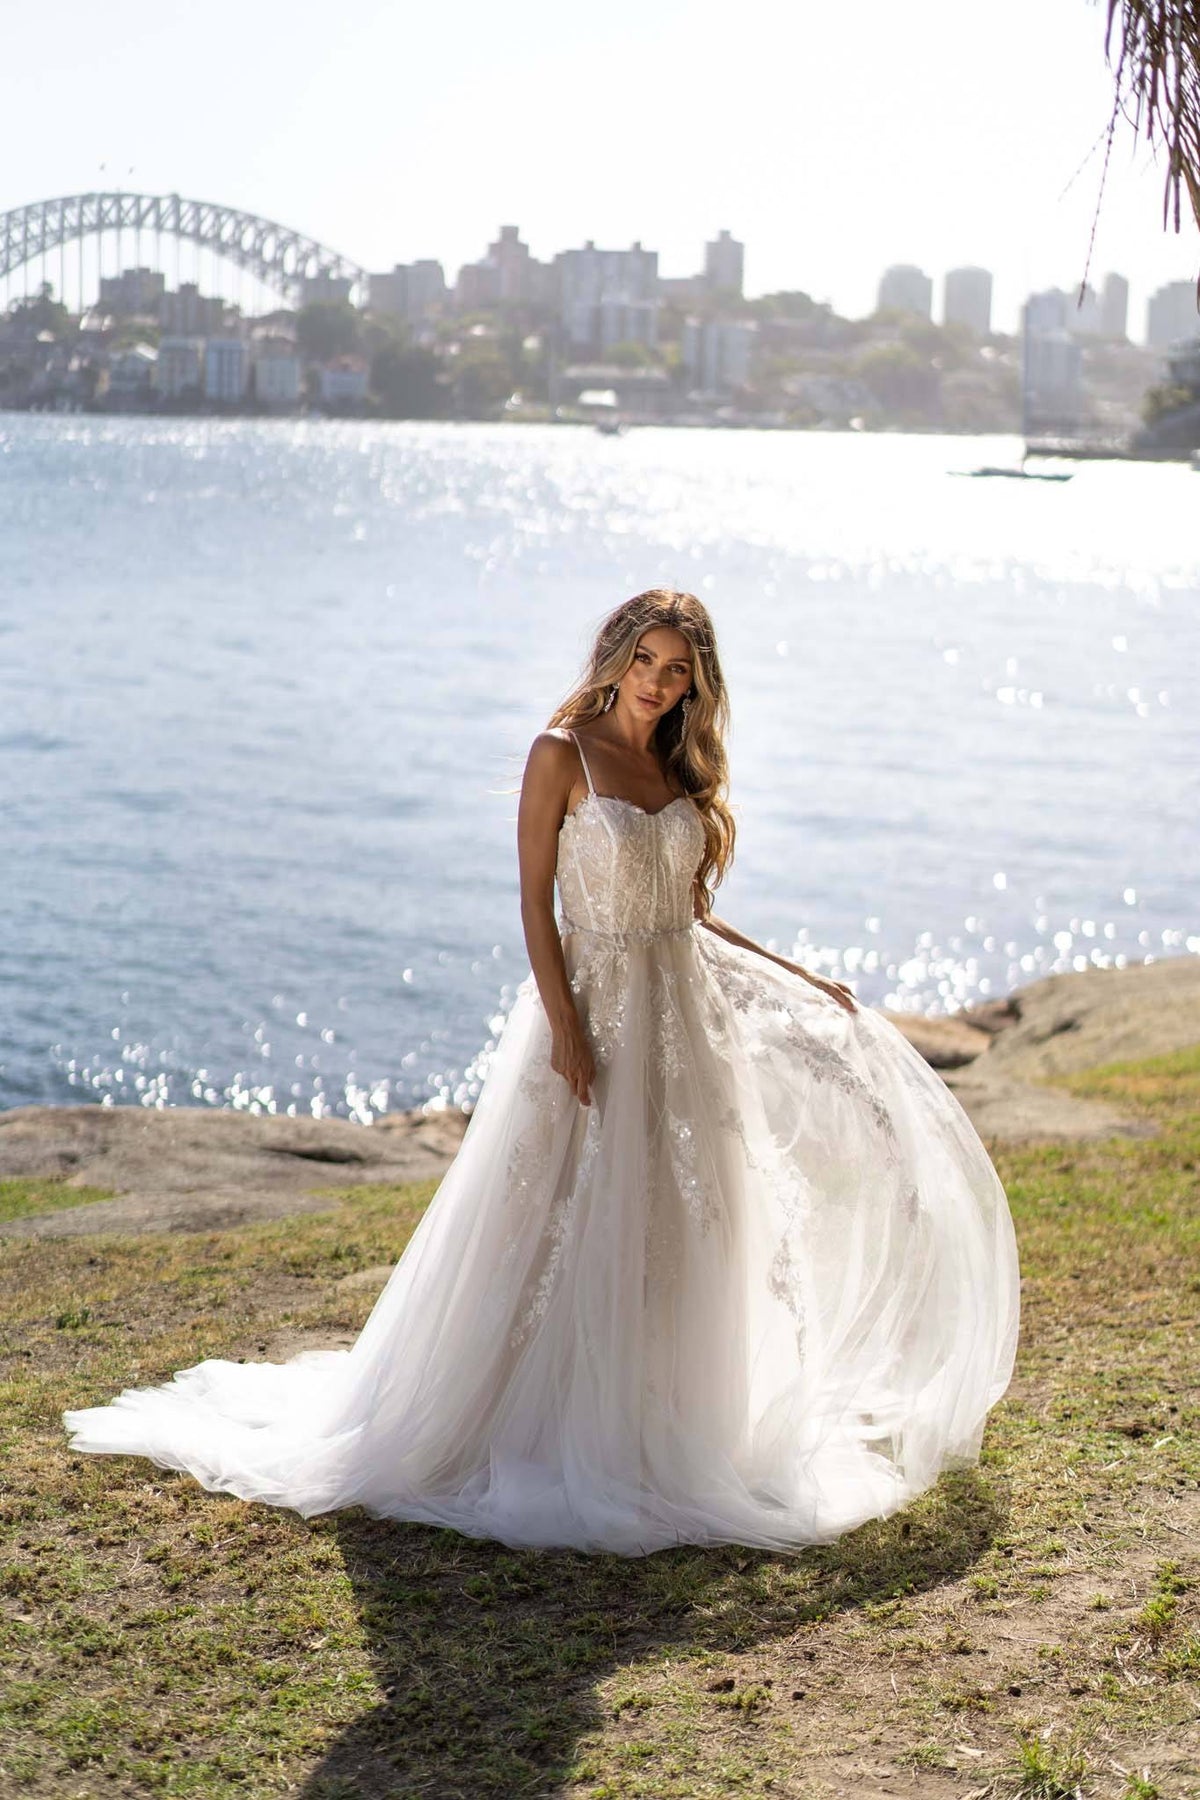 Ivory Off White Lace A-line Wedding Gown with Floral and Vine-like Lace Motifs Embellished on Layered Tulle, Trendy Exposed Bone Bodice, Voluminous Full A-line Skirt and Flowing Sweep Train